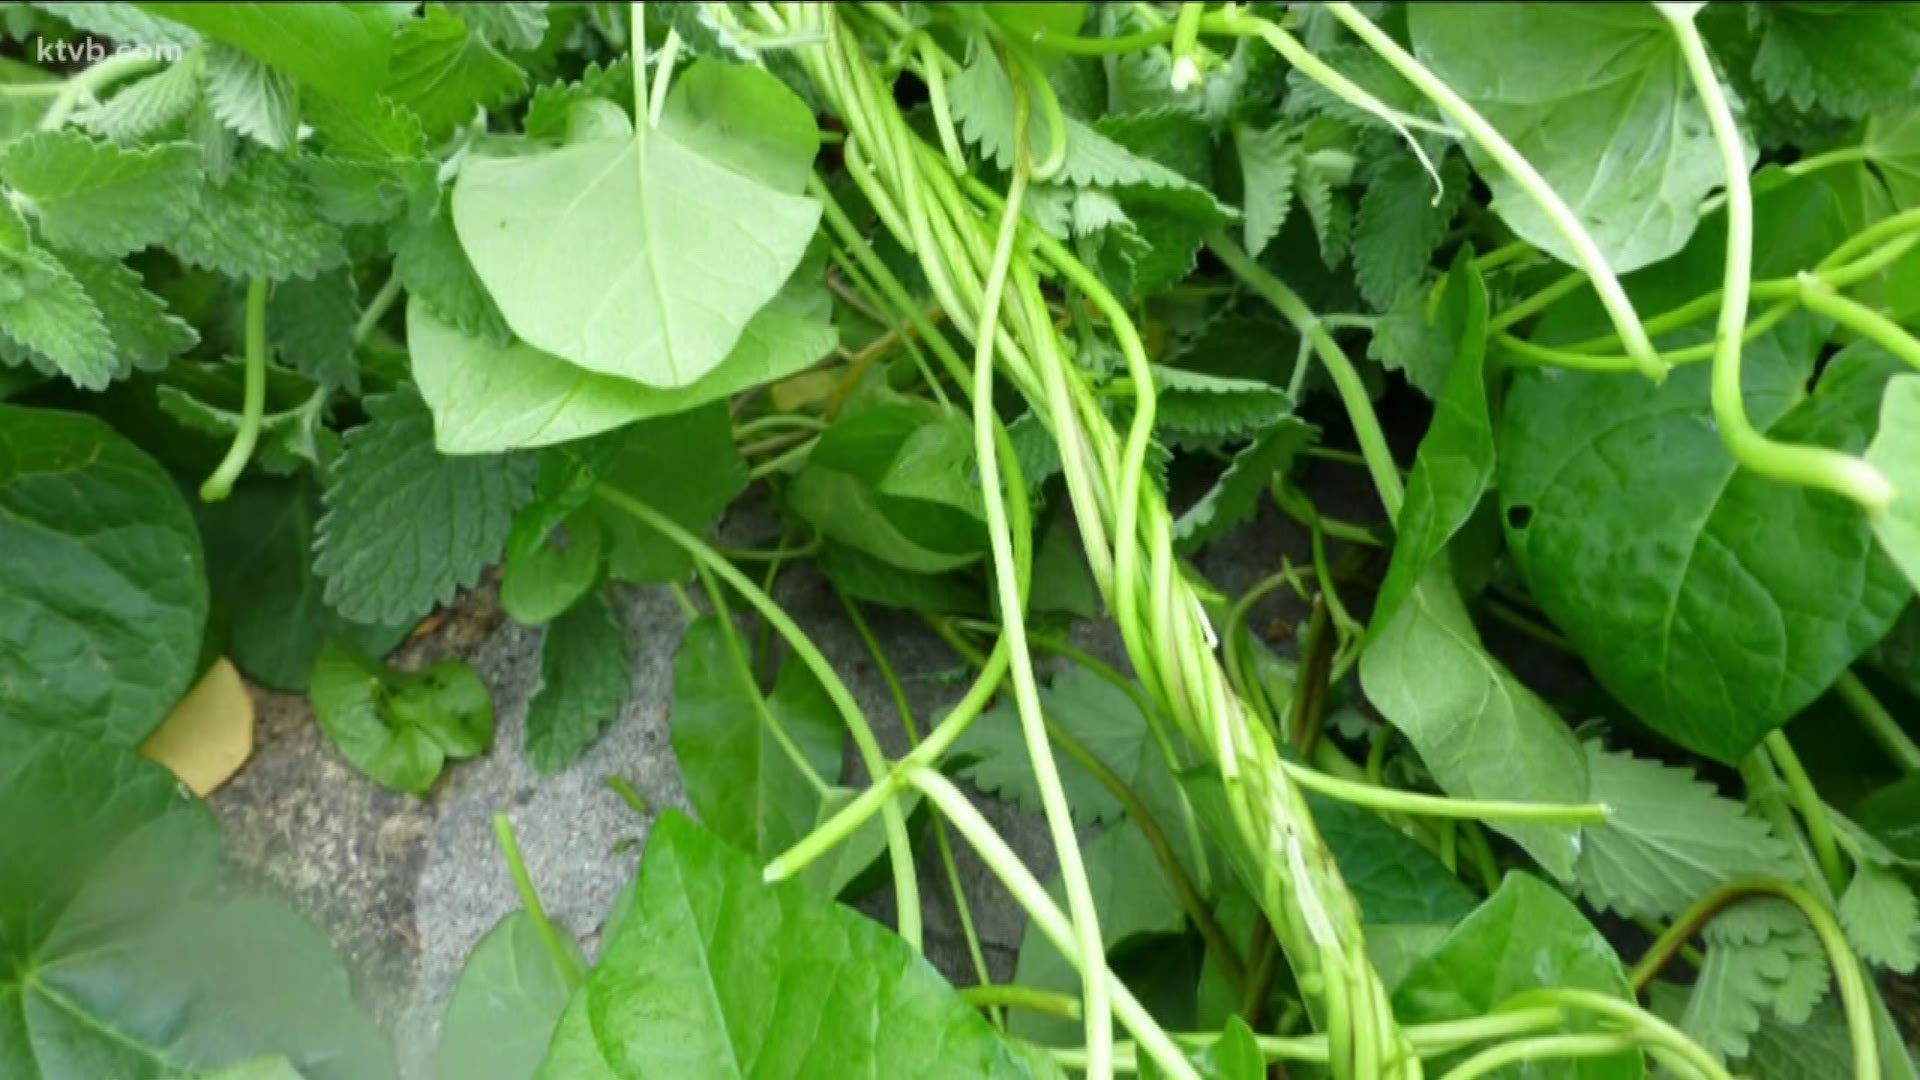 Jim Duthie shows us a few common weeds and what you can do to combat them.